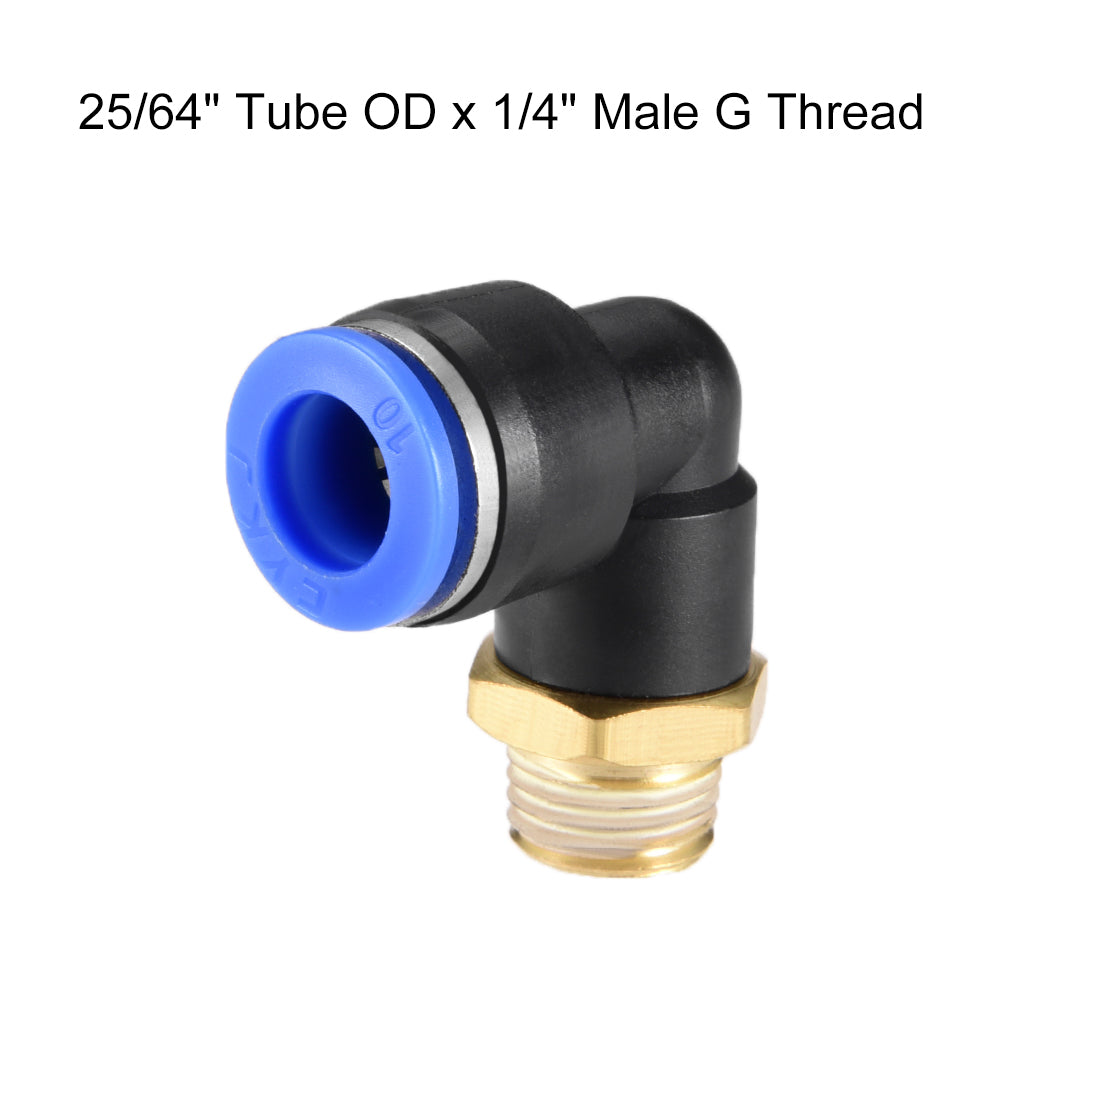 Uxcell Uxcell PL8-01 Pneumatic Push to Connect Fitting, Male Elbow - 5/16" Tube OD x 1/8" G Thread Tube Fitting Blue 2pcs